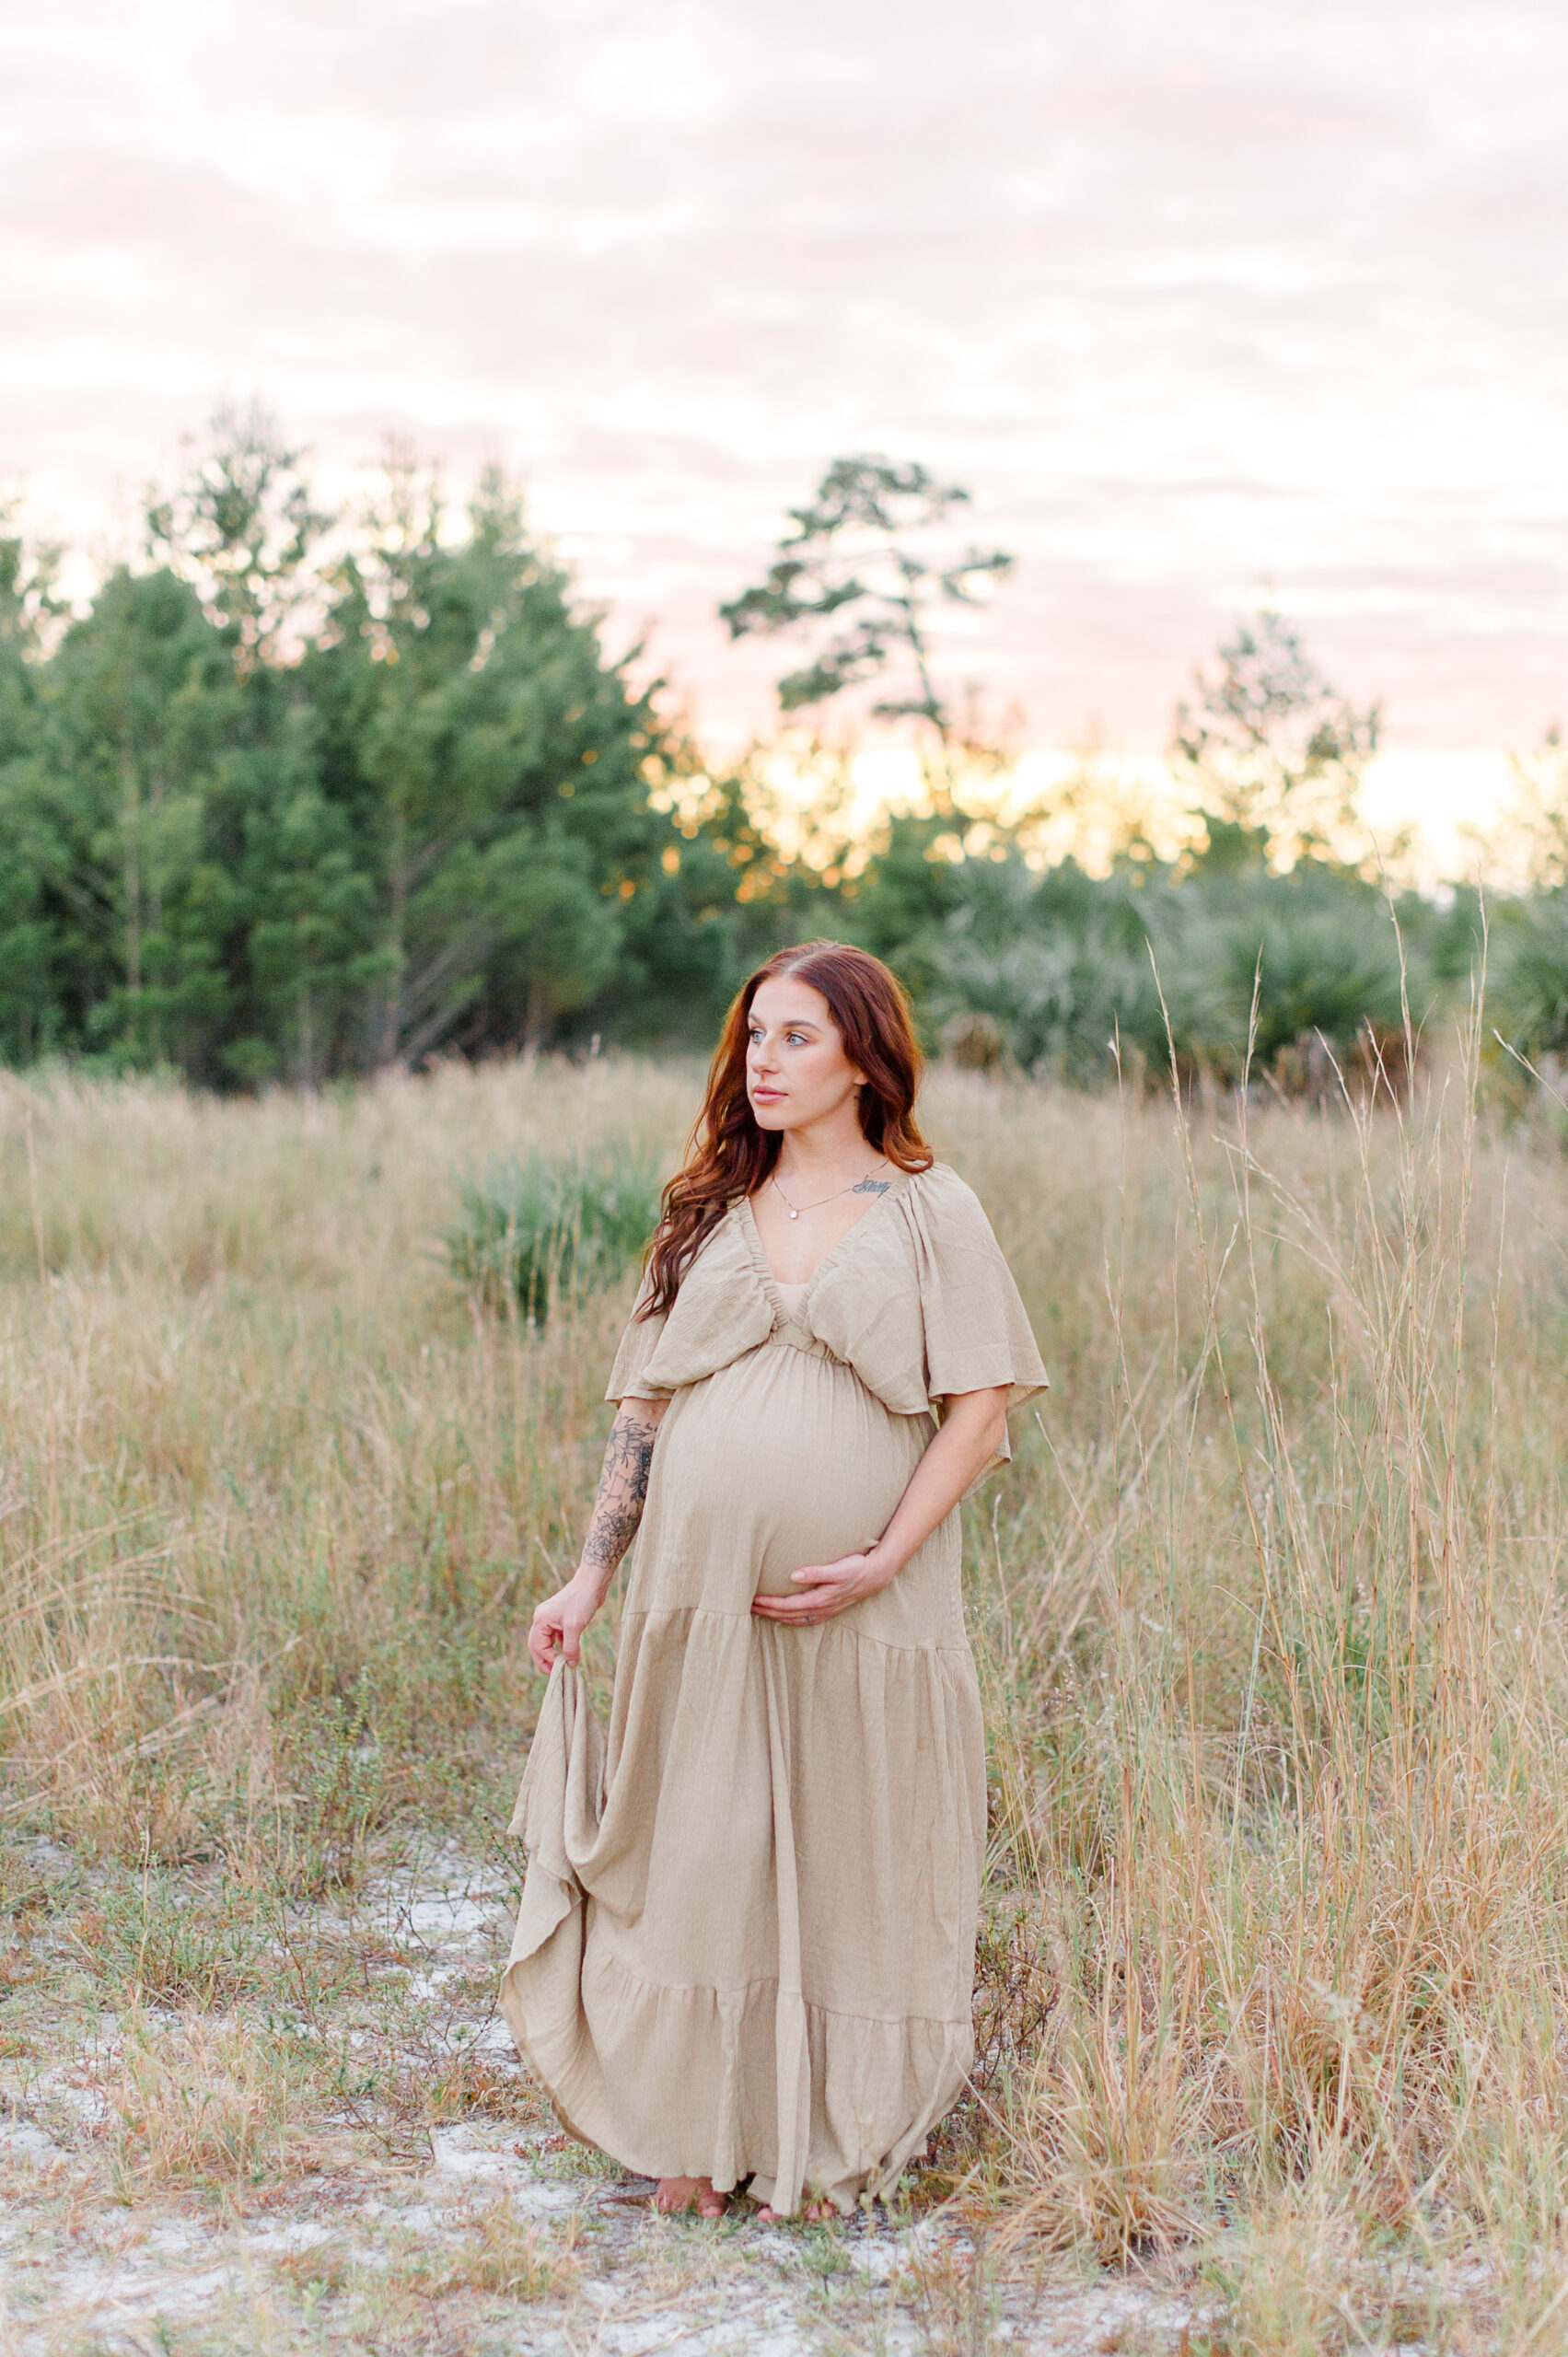 New mother looking over her shoulder while holding her belly and dress during her Orlando maternity photo session in a tall grass field Orlando prenatal yoga